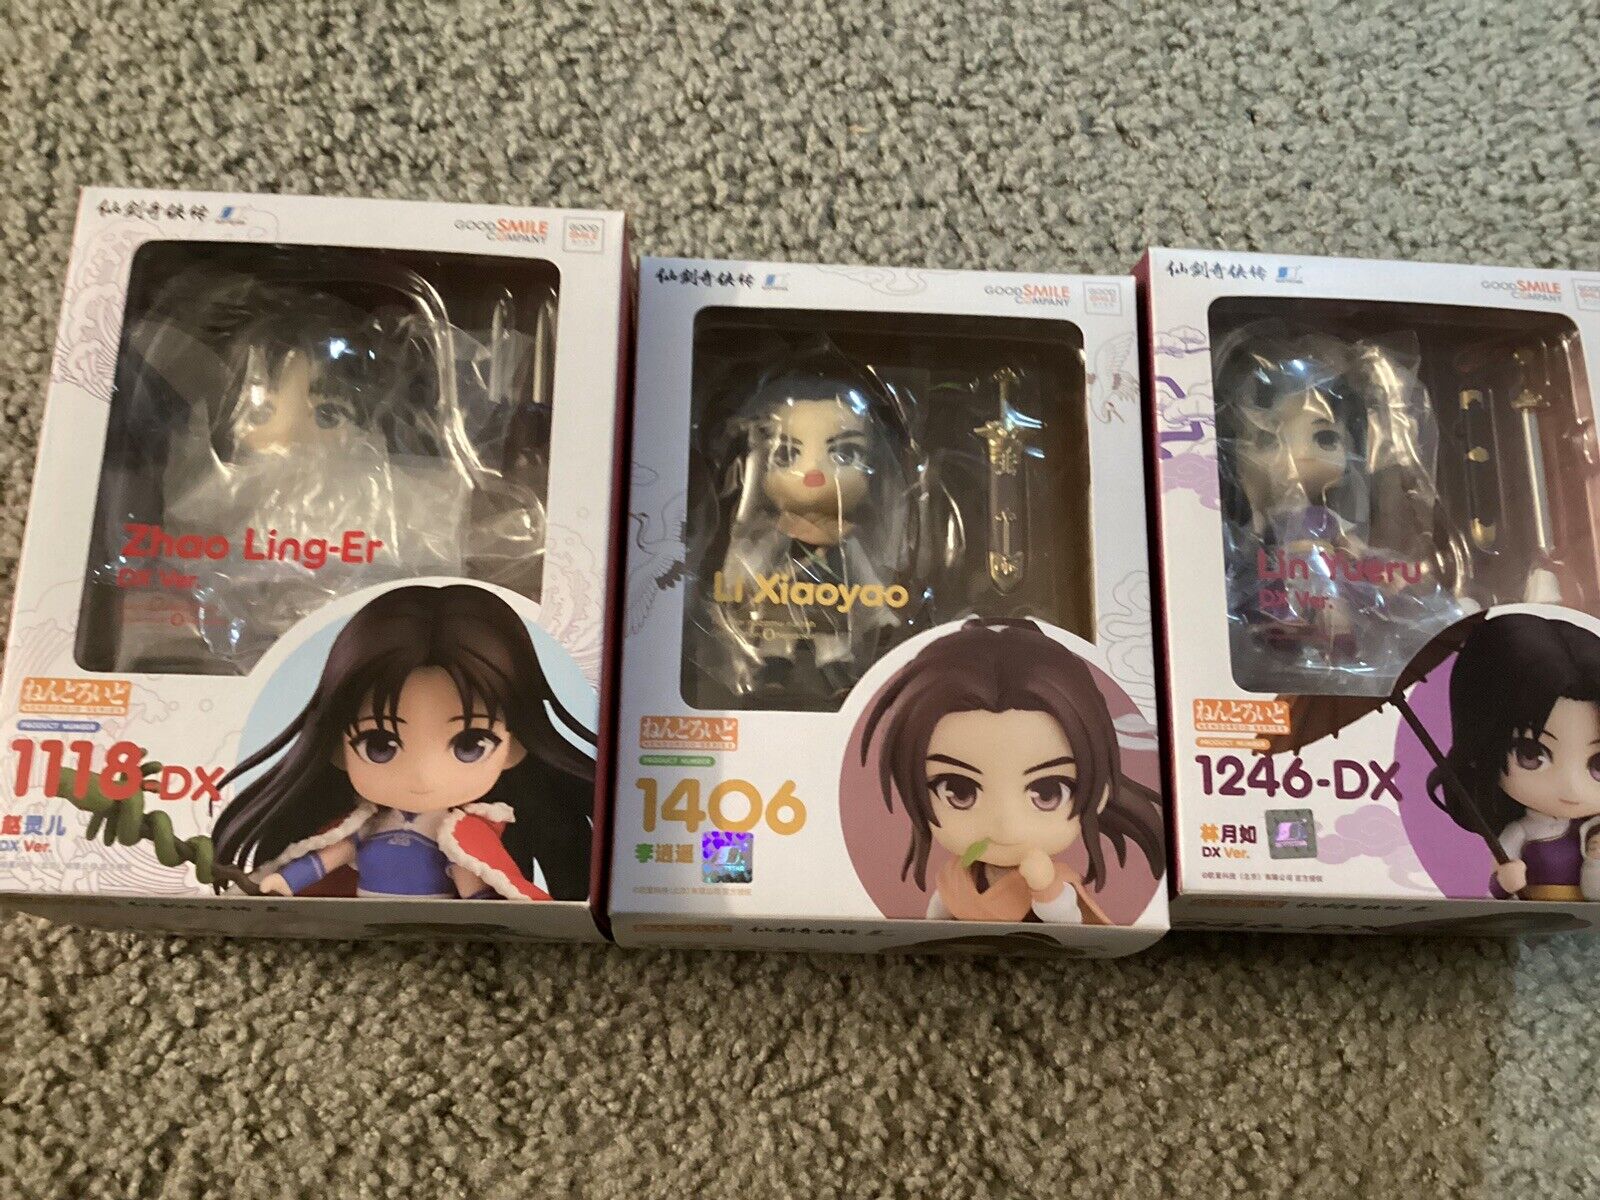 Nendoroid The Legend of Sword and Fairy Complete Set 1118-DX, 1246DX and 1406